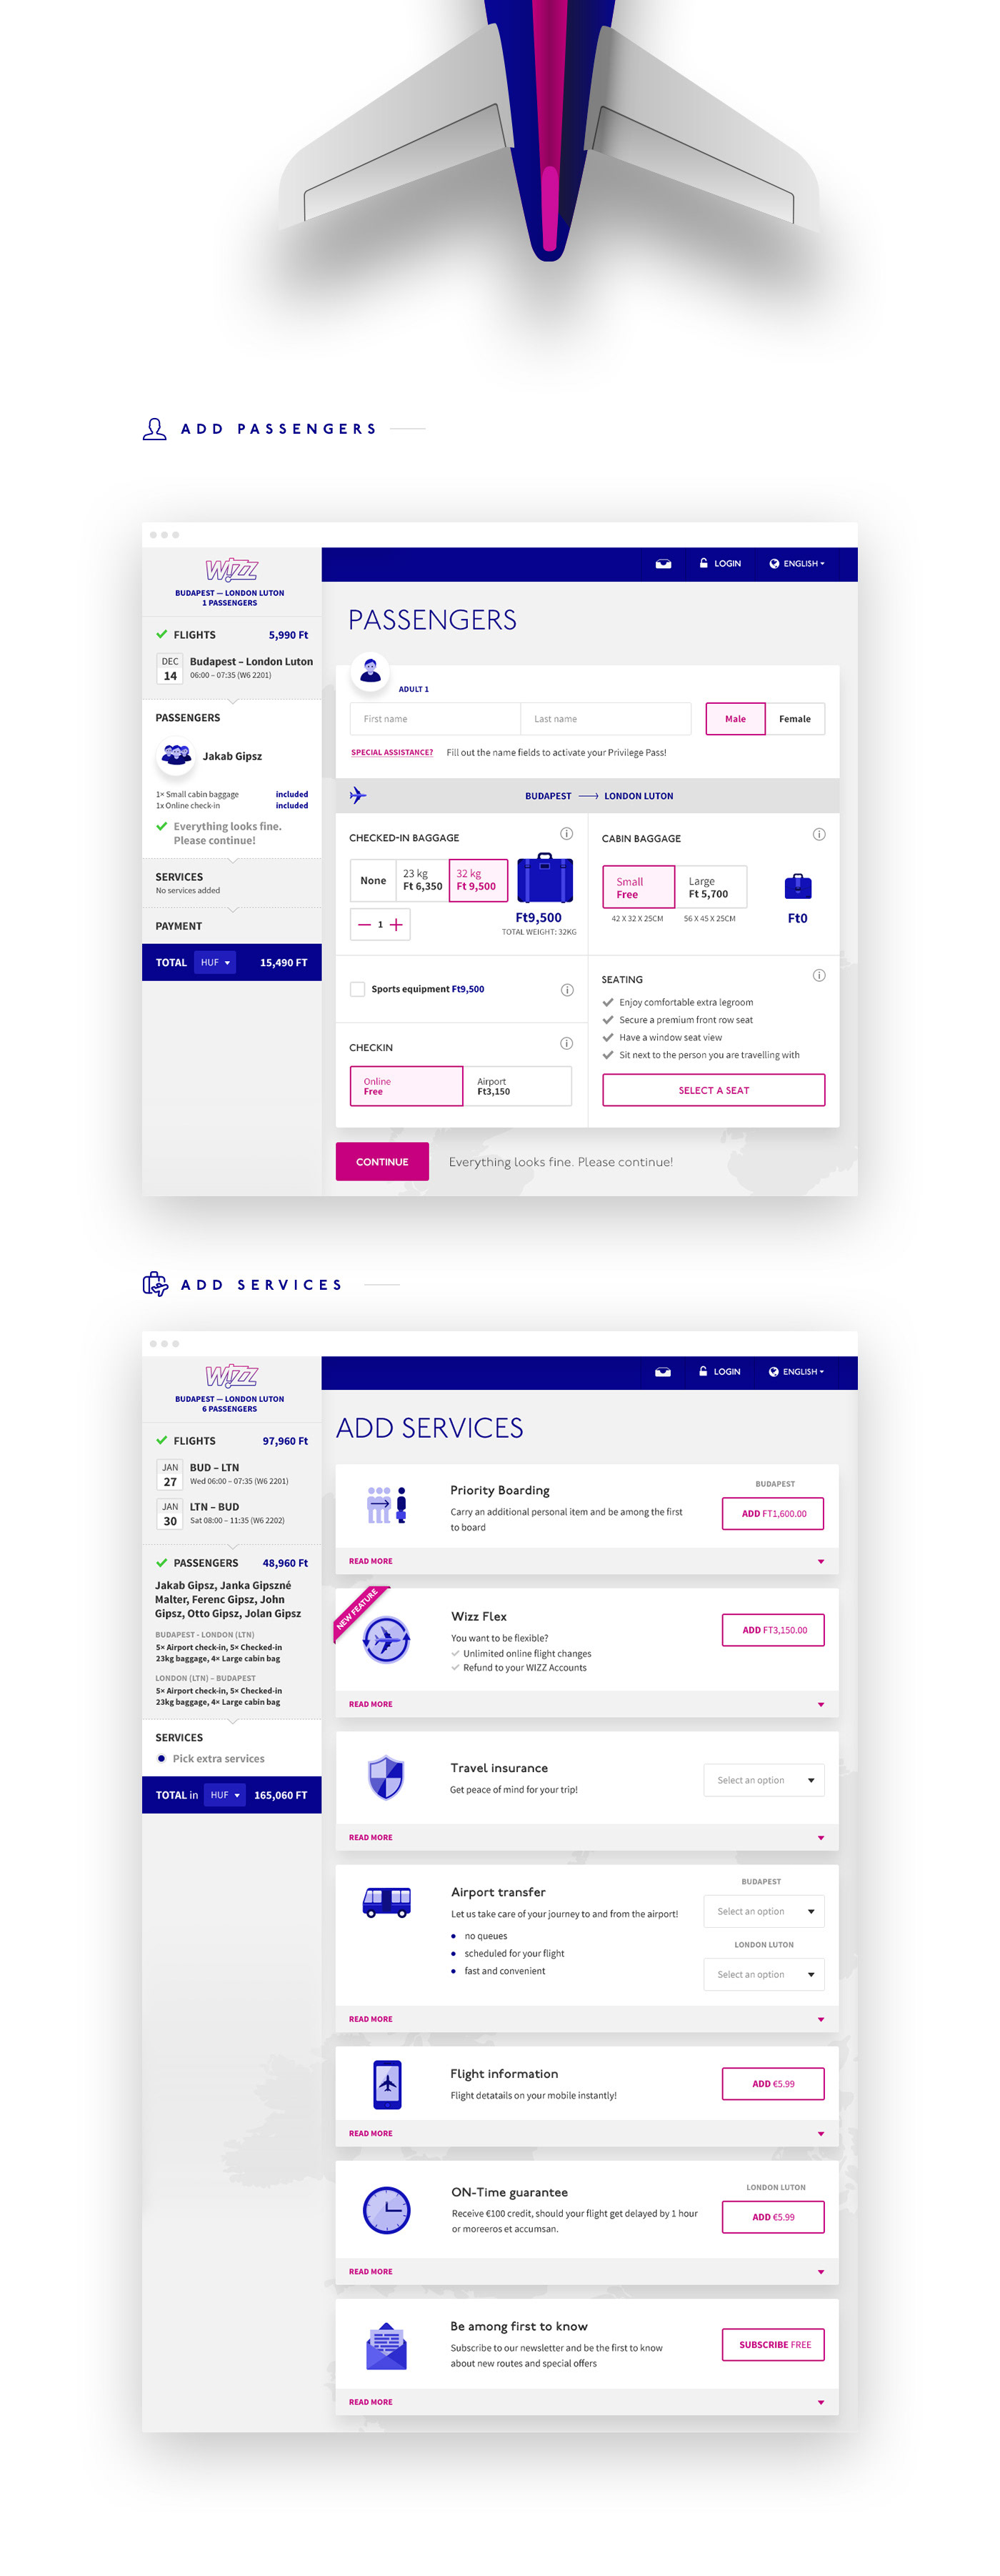 wizzair Webdesign mobile ux UI airplane Airlines wizz redesign Responsive